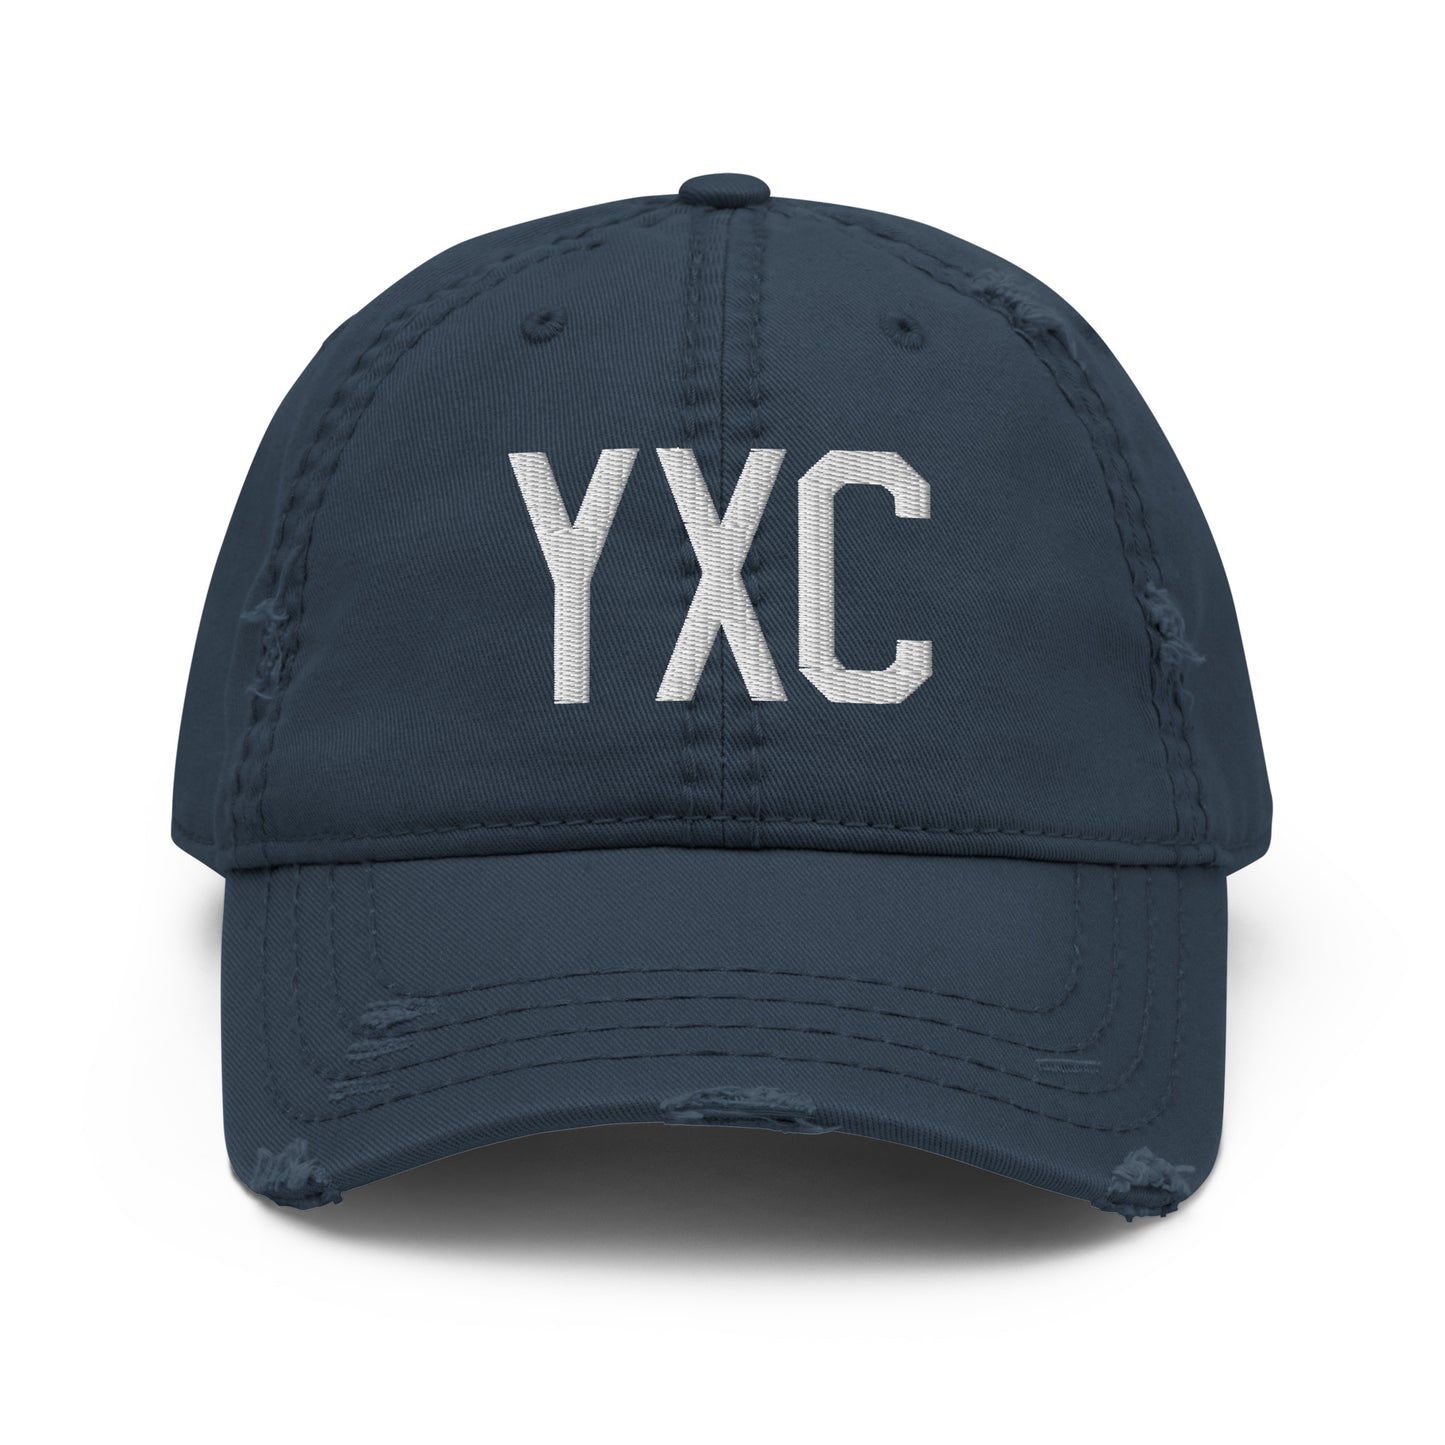 Airport Code Distressed Hat - White • YXC Cranbrook • YHM Designs - Image 13